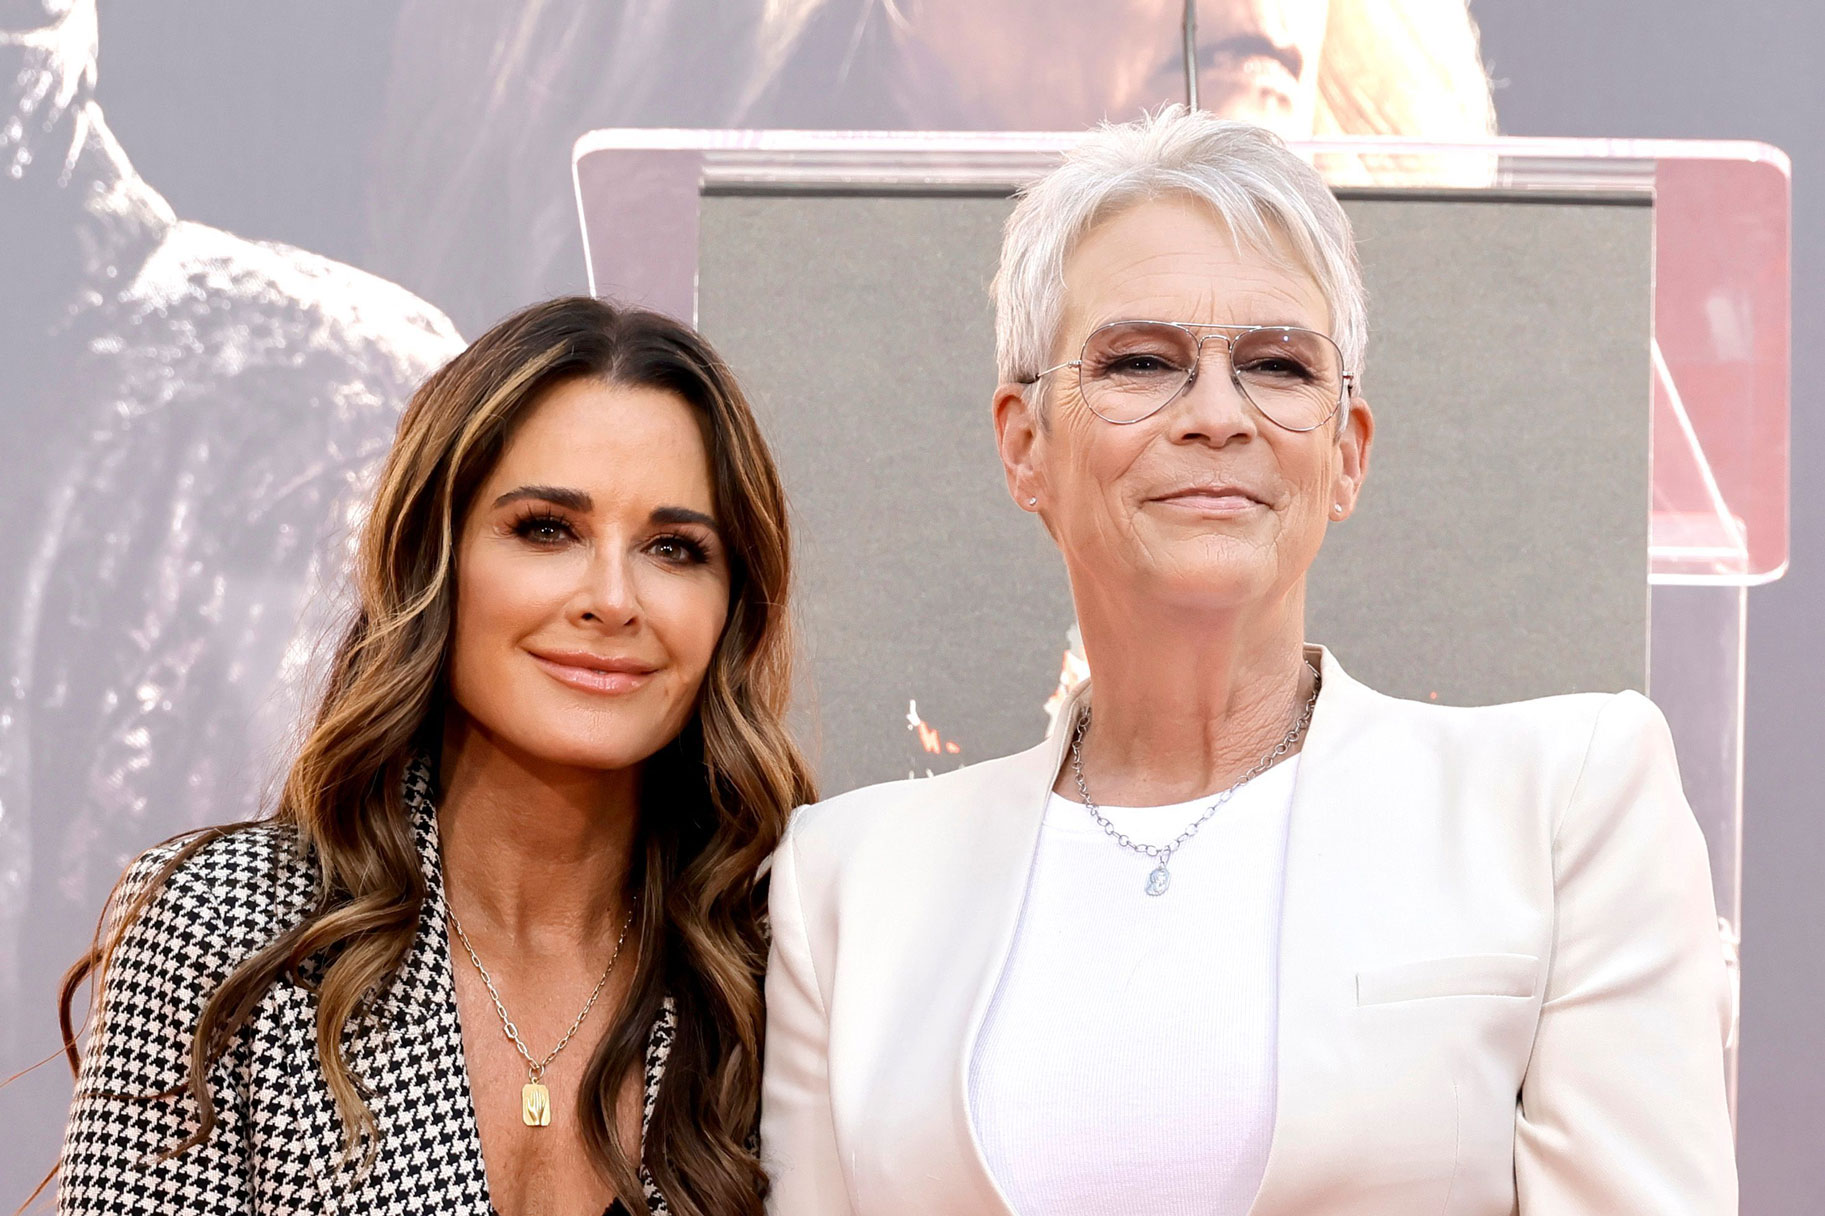 Kyle Richards Jamie Lee Curtis photographed on a red carpet